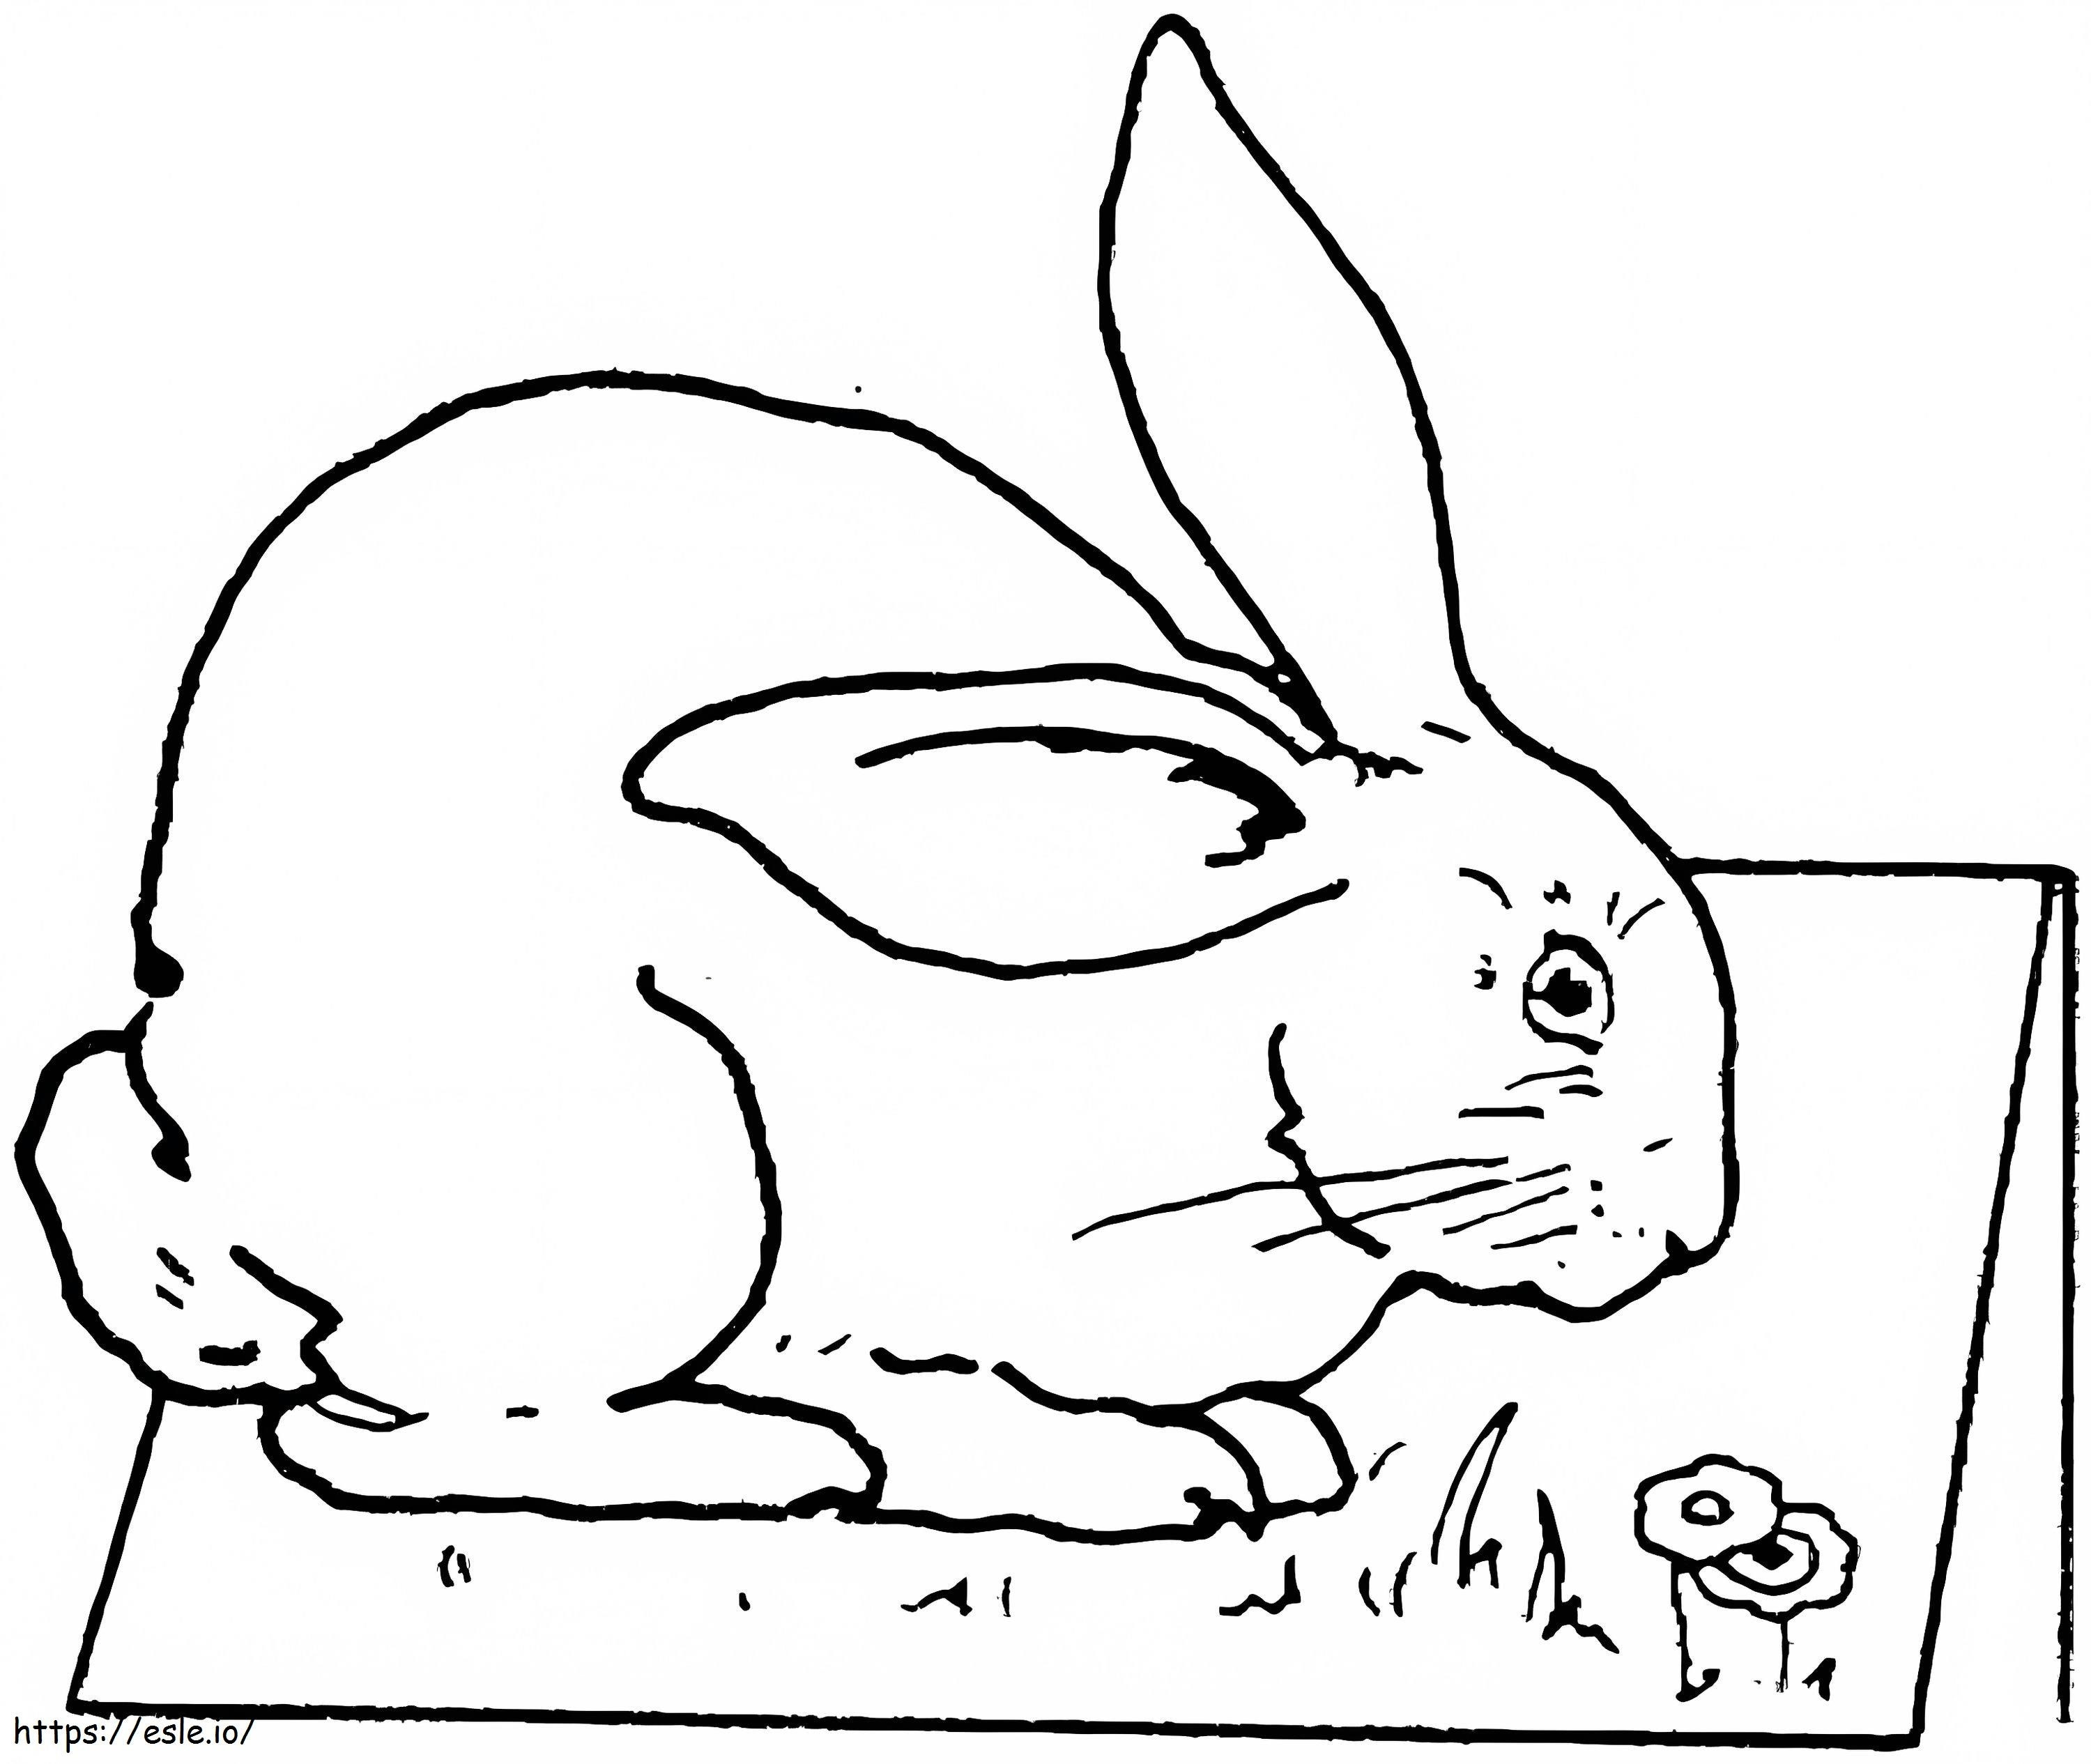 Rabbit On Ground coloring page